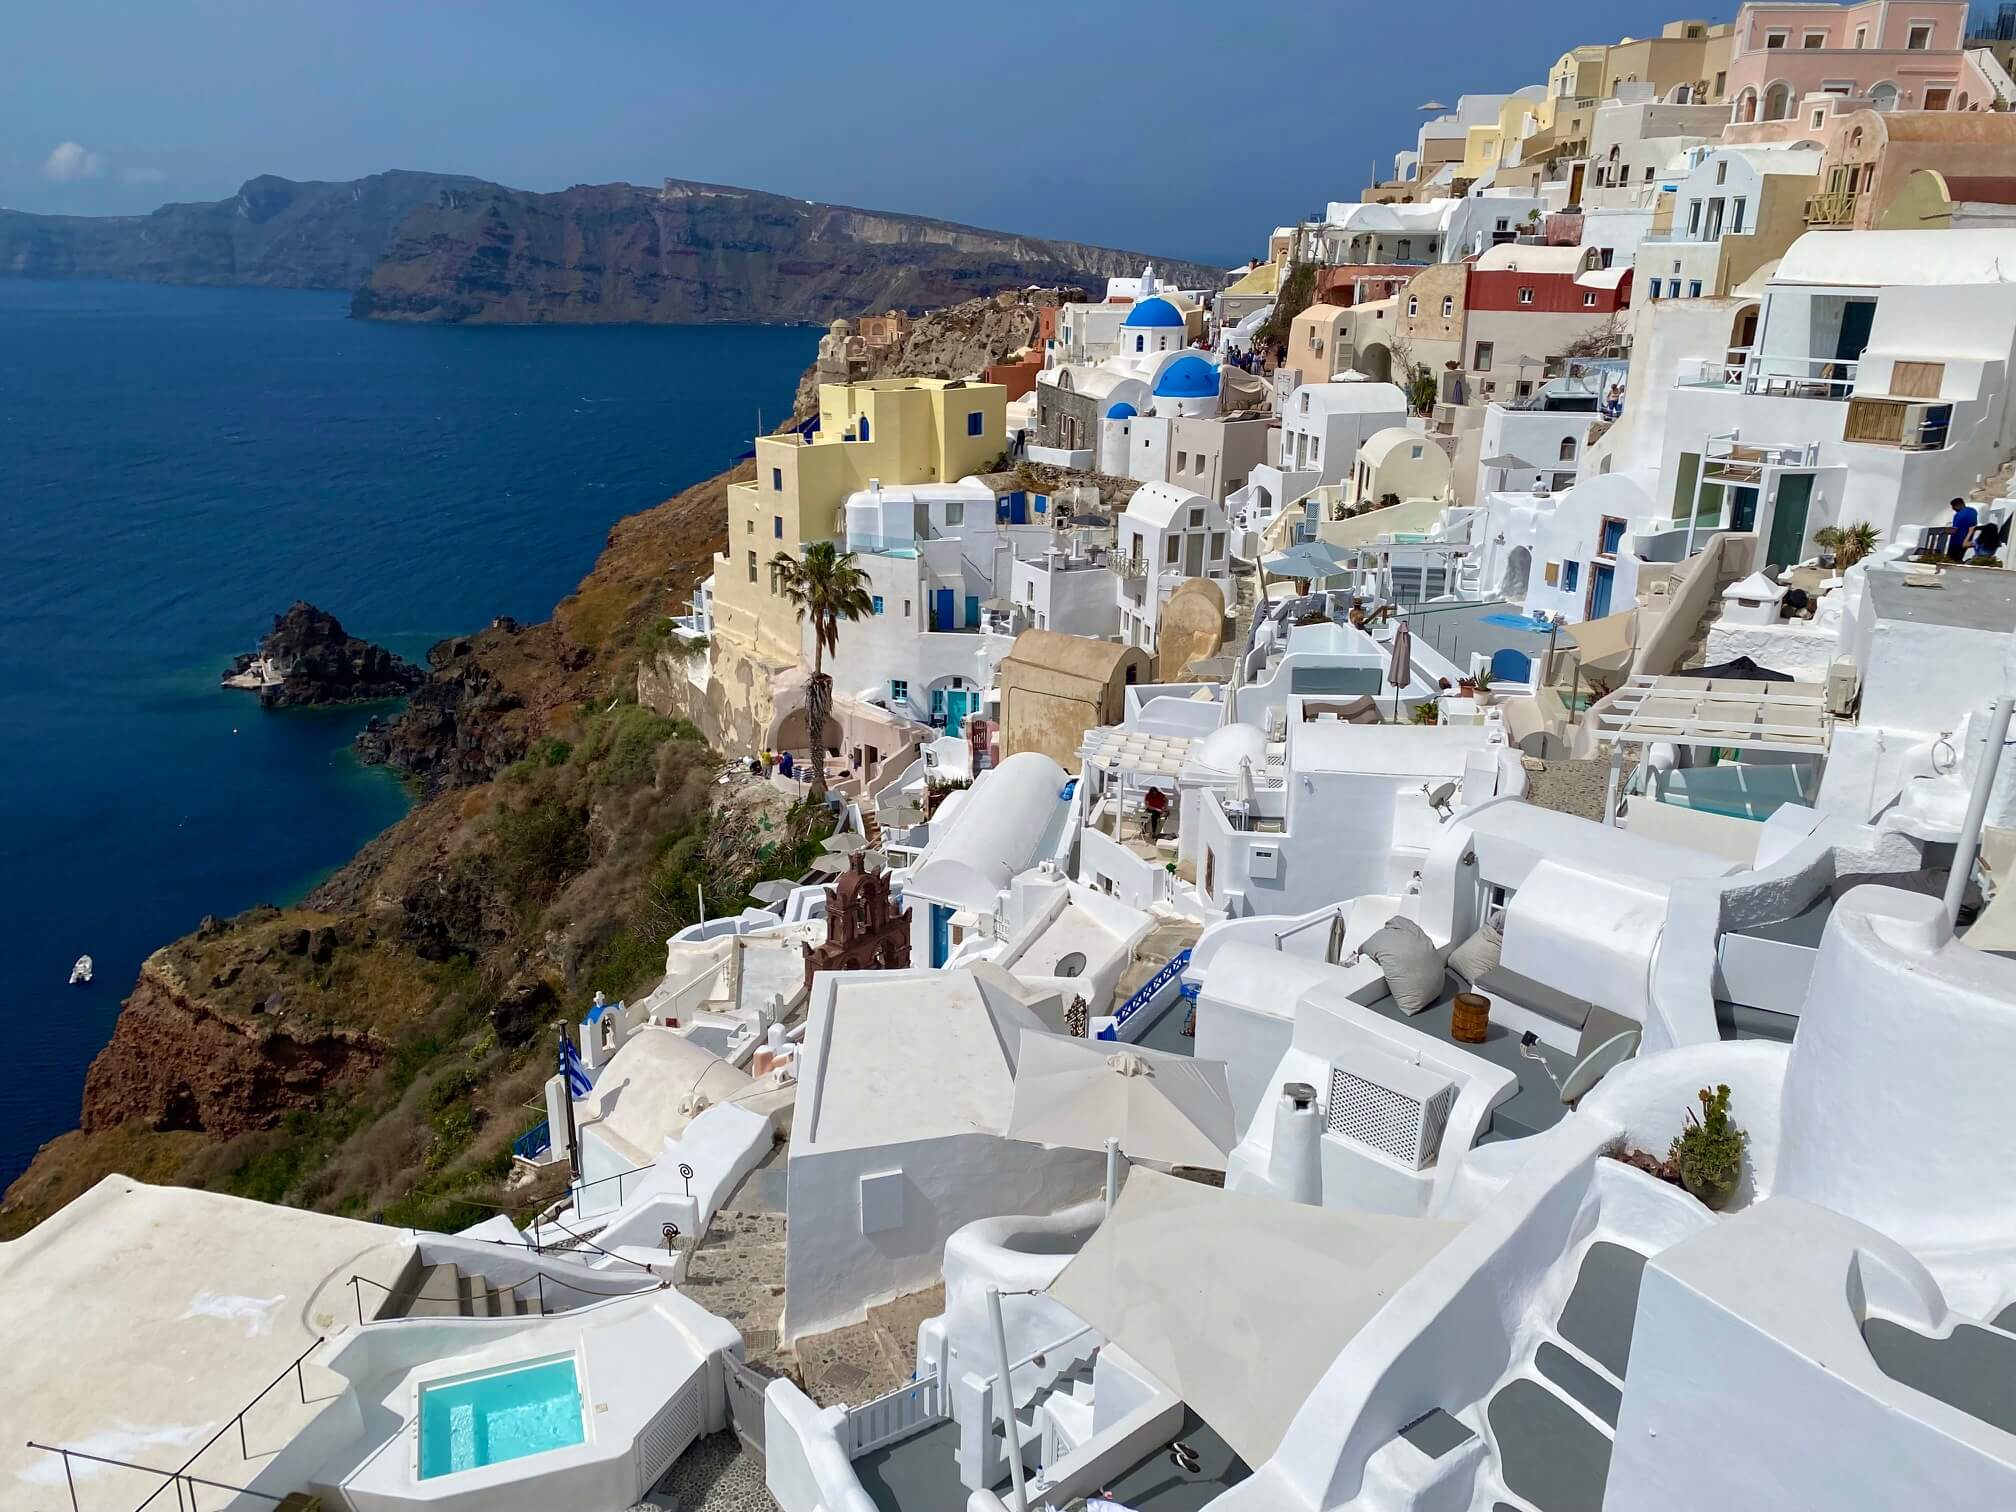 Here’s the Best Way to Get from Athens to Santorini